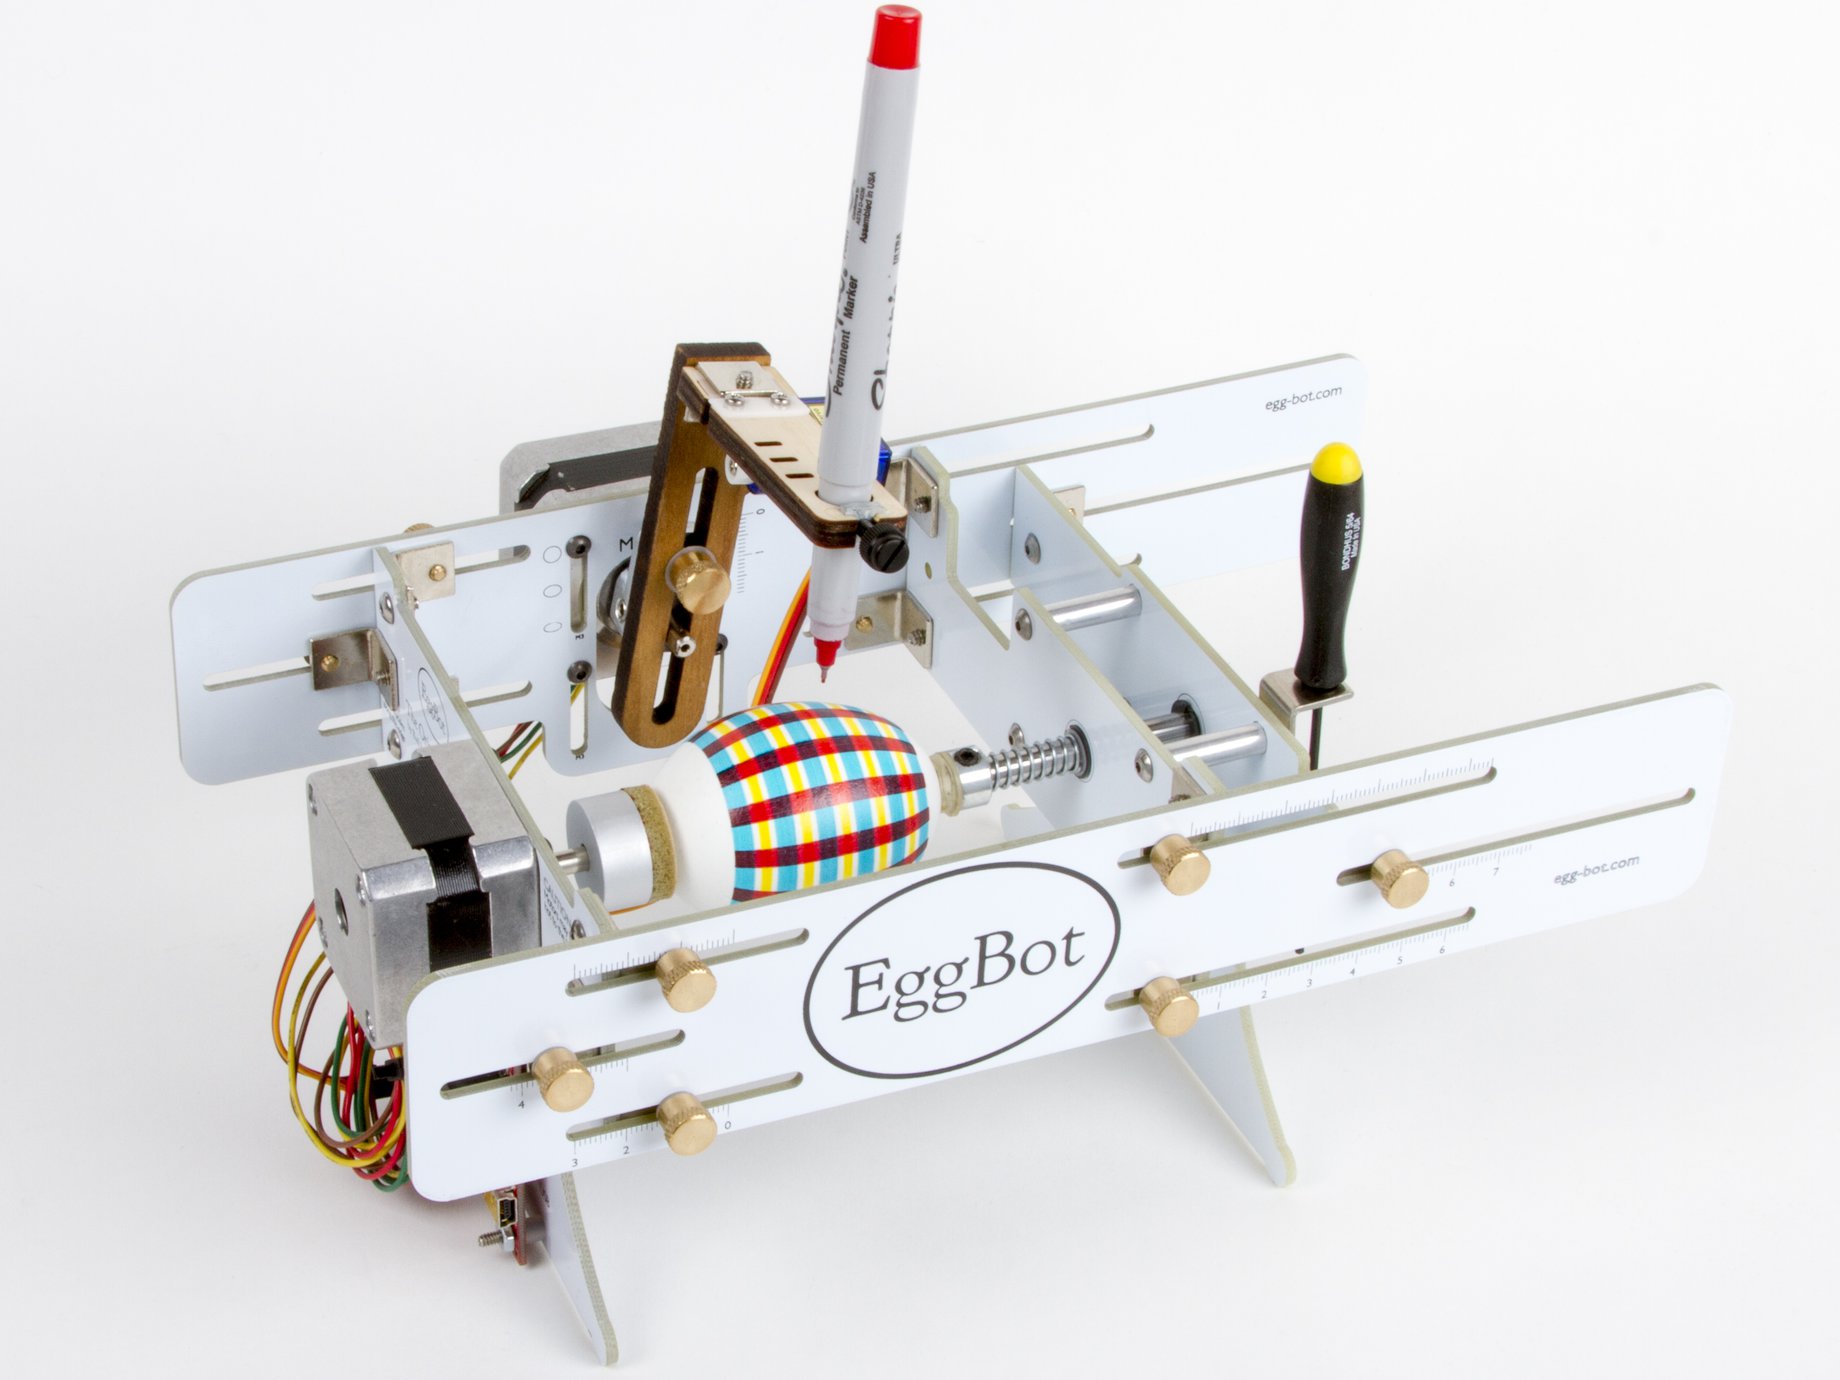 image of egg bot decorating an egg with a plaid pattern